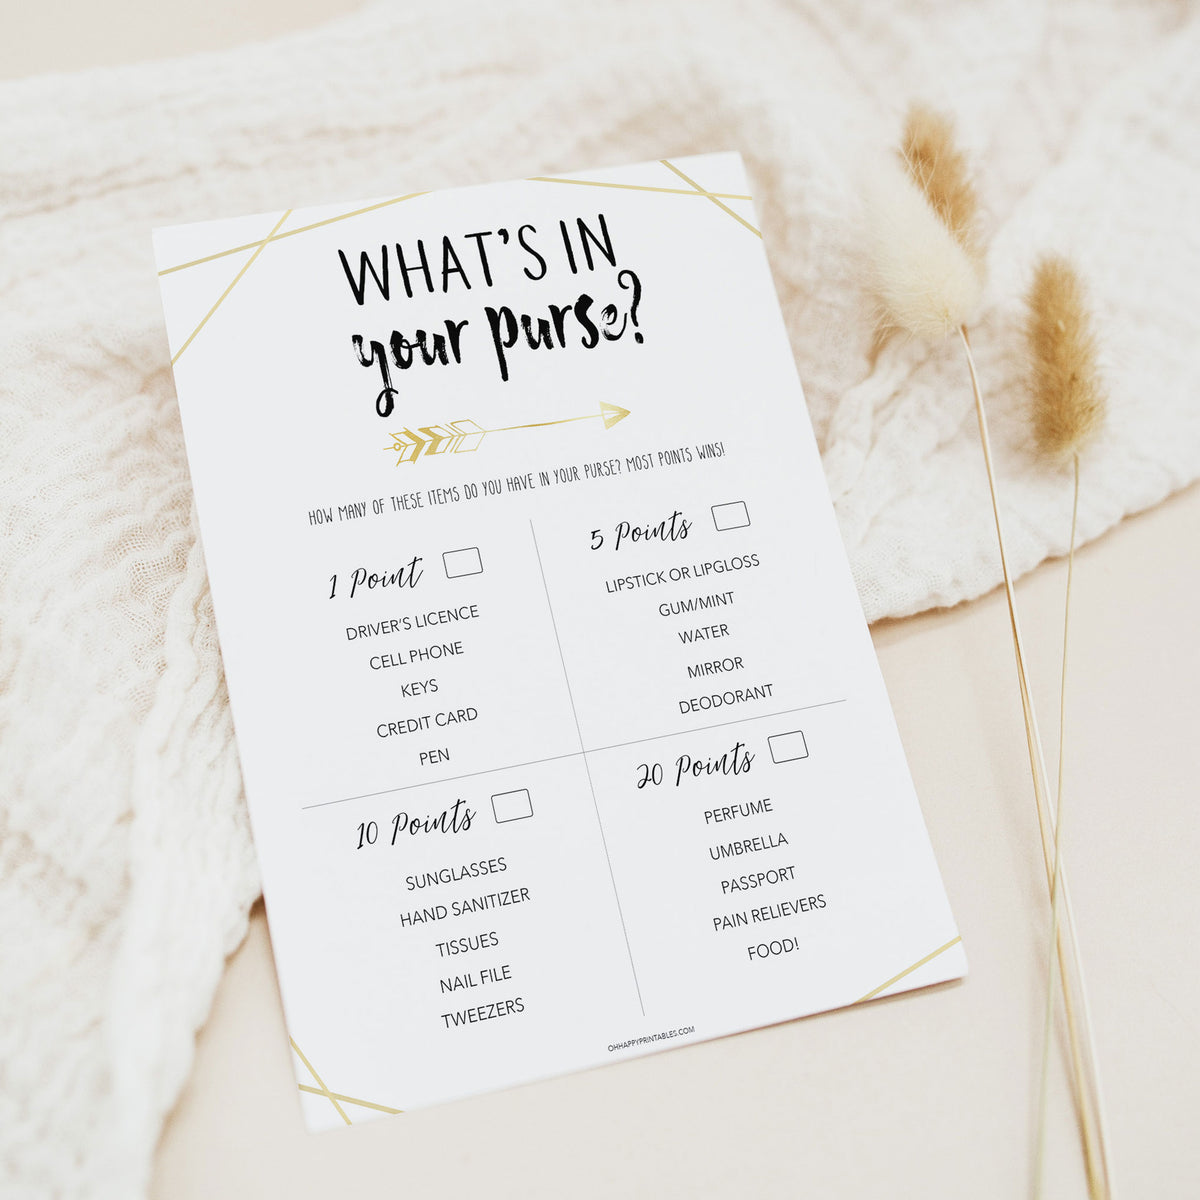 BRIDAL SHOWER GAMES - My Wedding Planner in Hungary